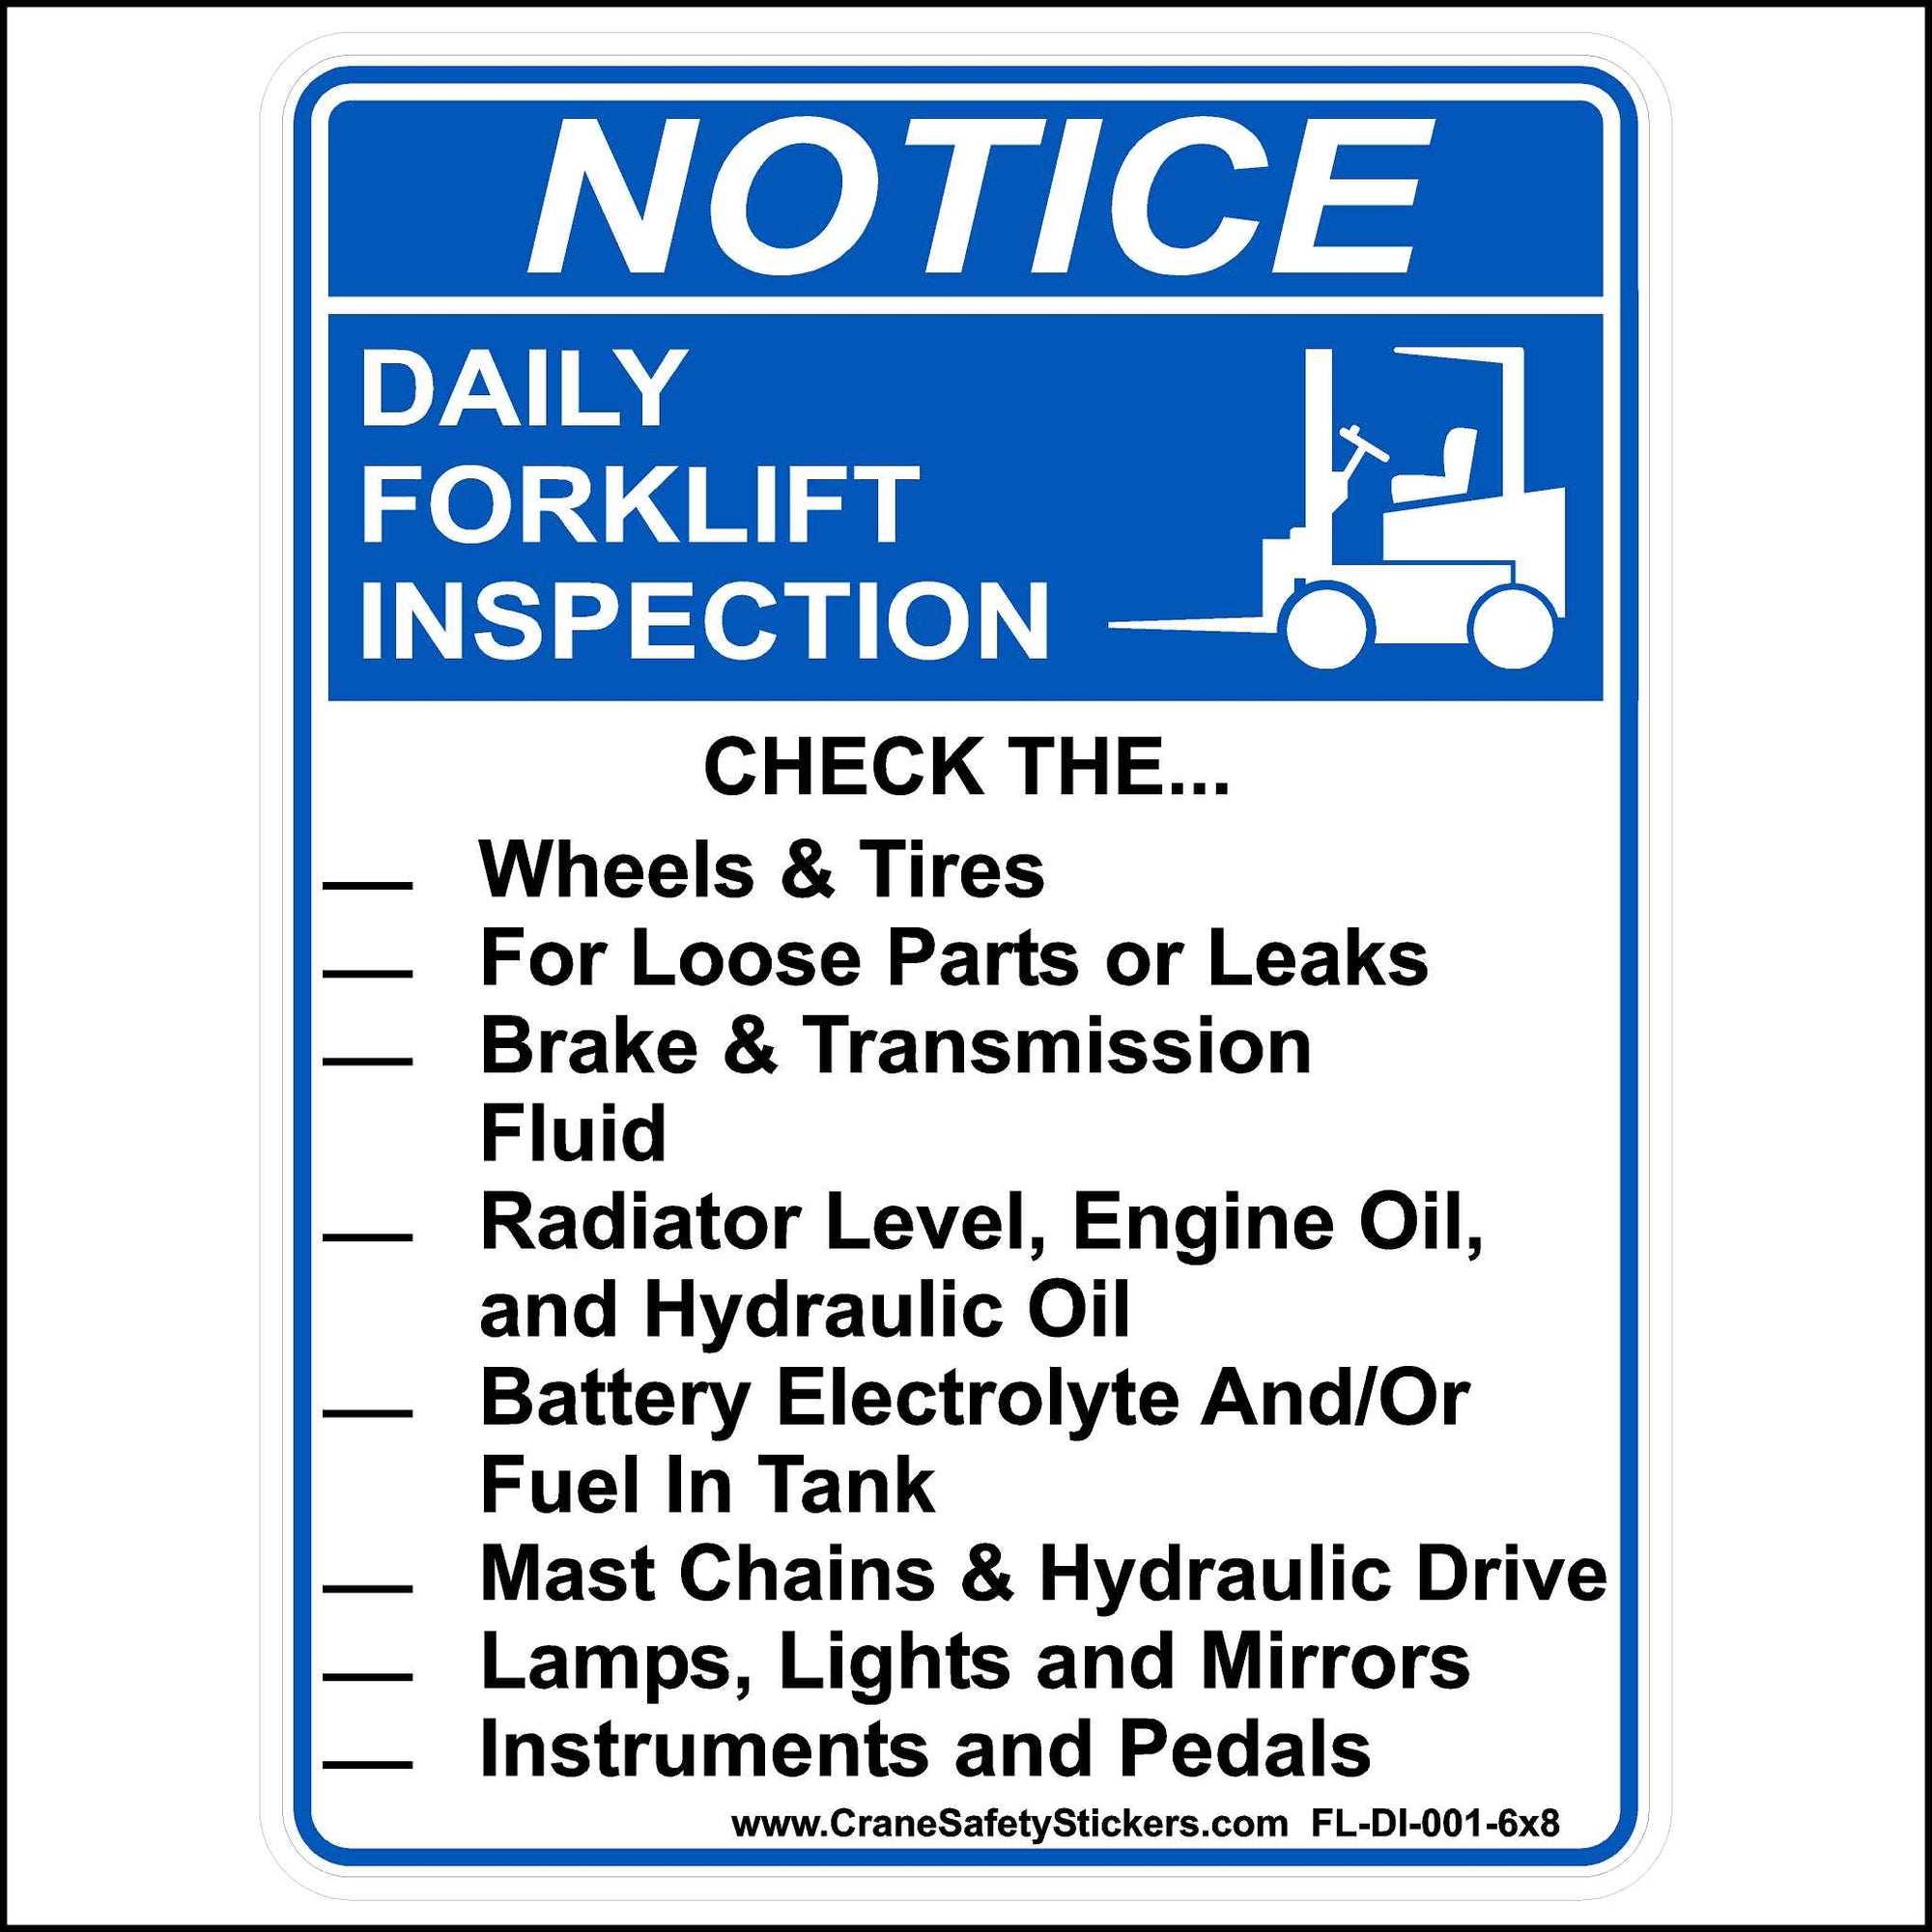 Daily Forklift Inspection Checklist Sticker, printed with. NOTICE, DAILY FORKLIFT INSPECTION. CHECK THE. Wheels & Tires For Loose Parts or Leaks, Brake & Transmission Fluid, Radiator Level, Engine Oil, and Hydraulic Oil, Battery Electrolyte And/Or Fuel In Tank, Mast Chains & Hydraulic Drive, Lamps, Lights and Mirrors, Instruments and Pedals.